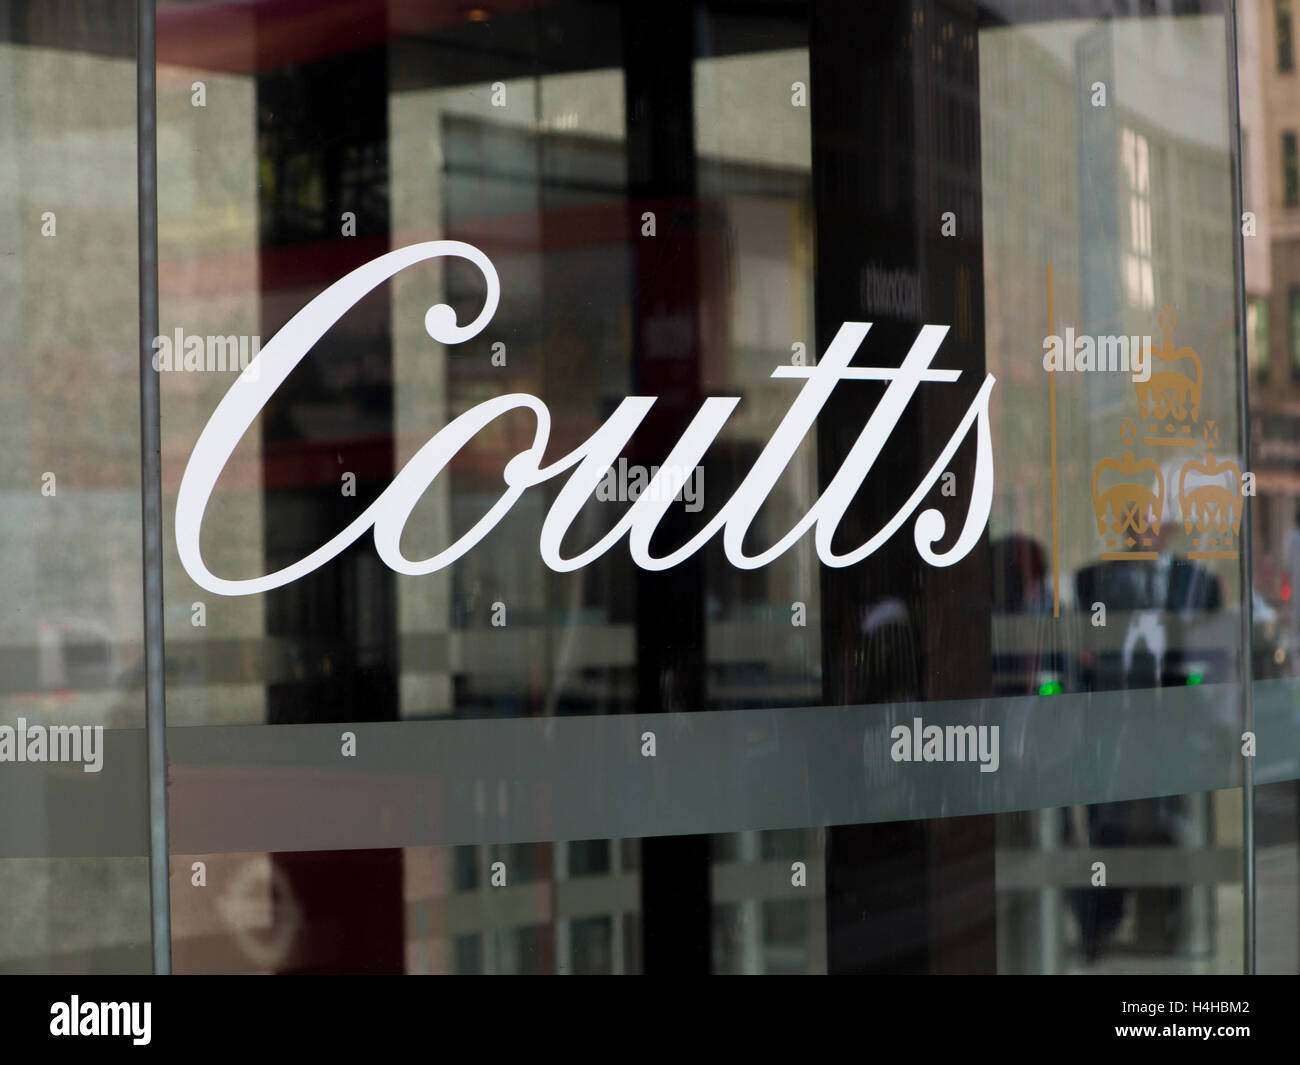 Coutss Bank on the Strand, London Stock Photo